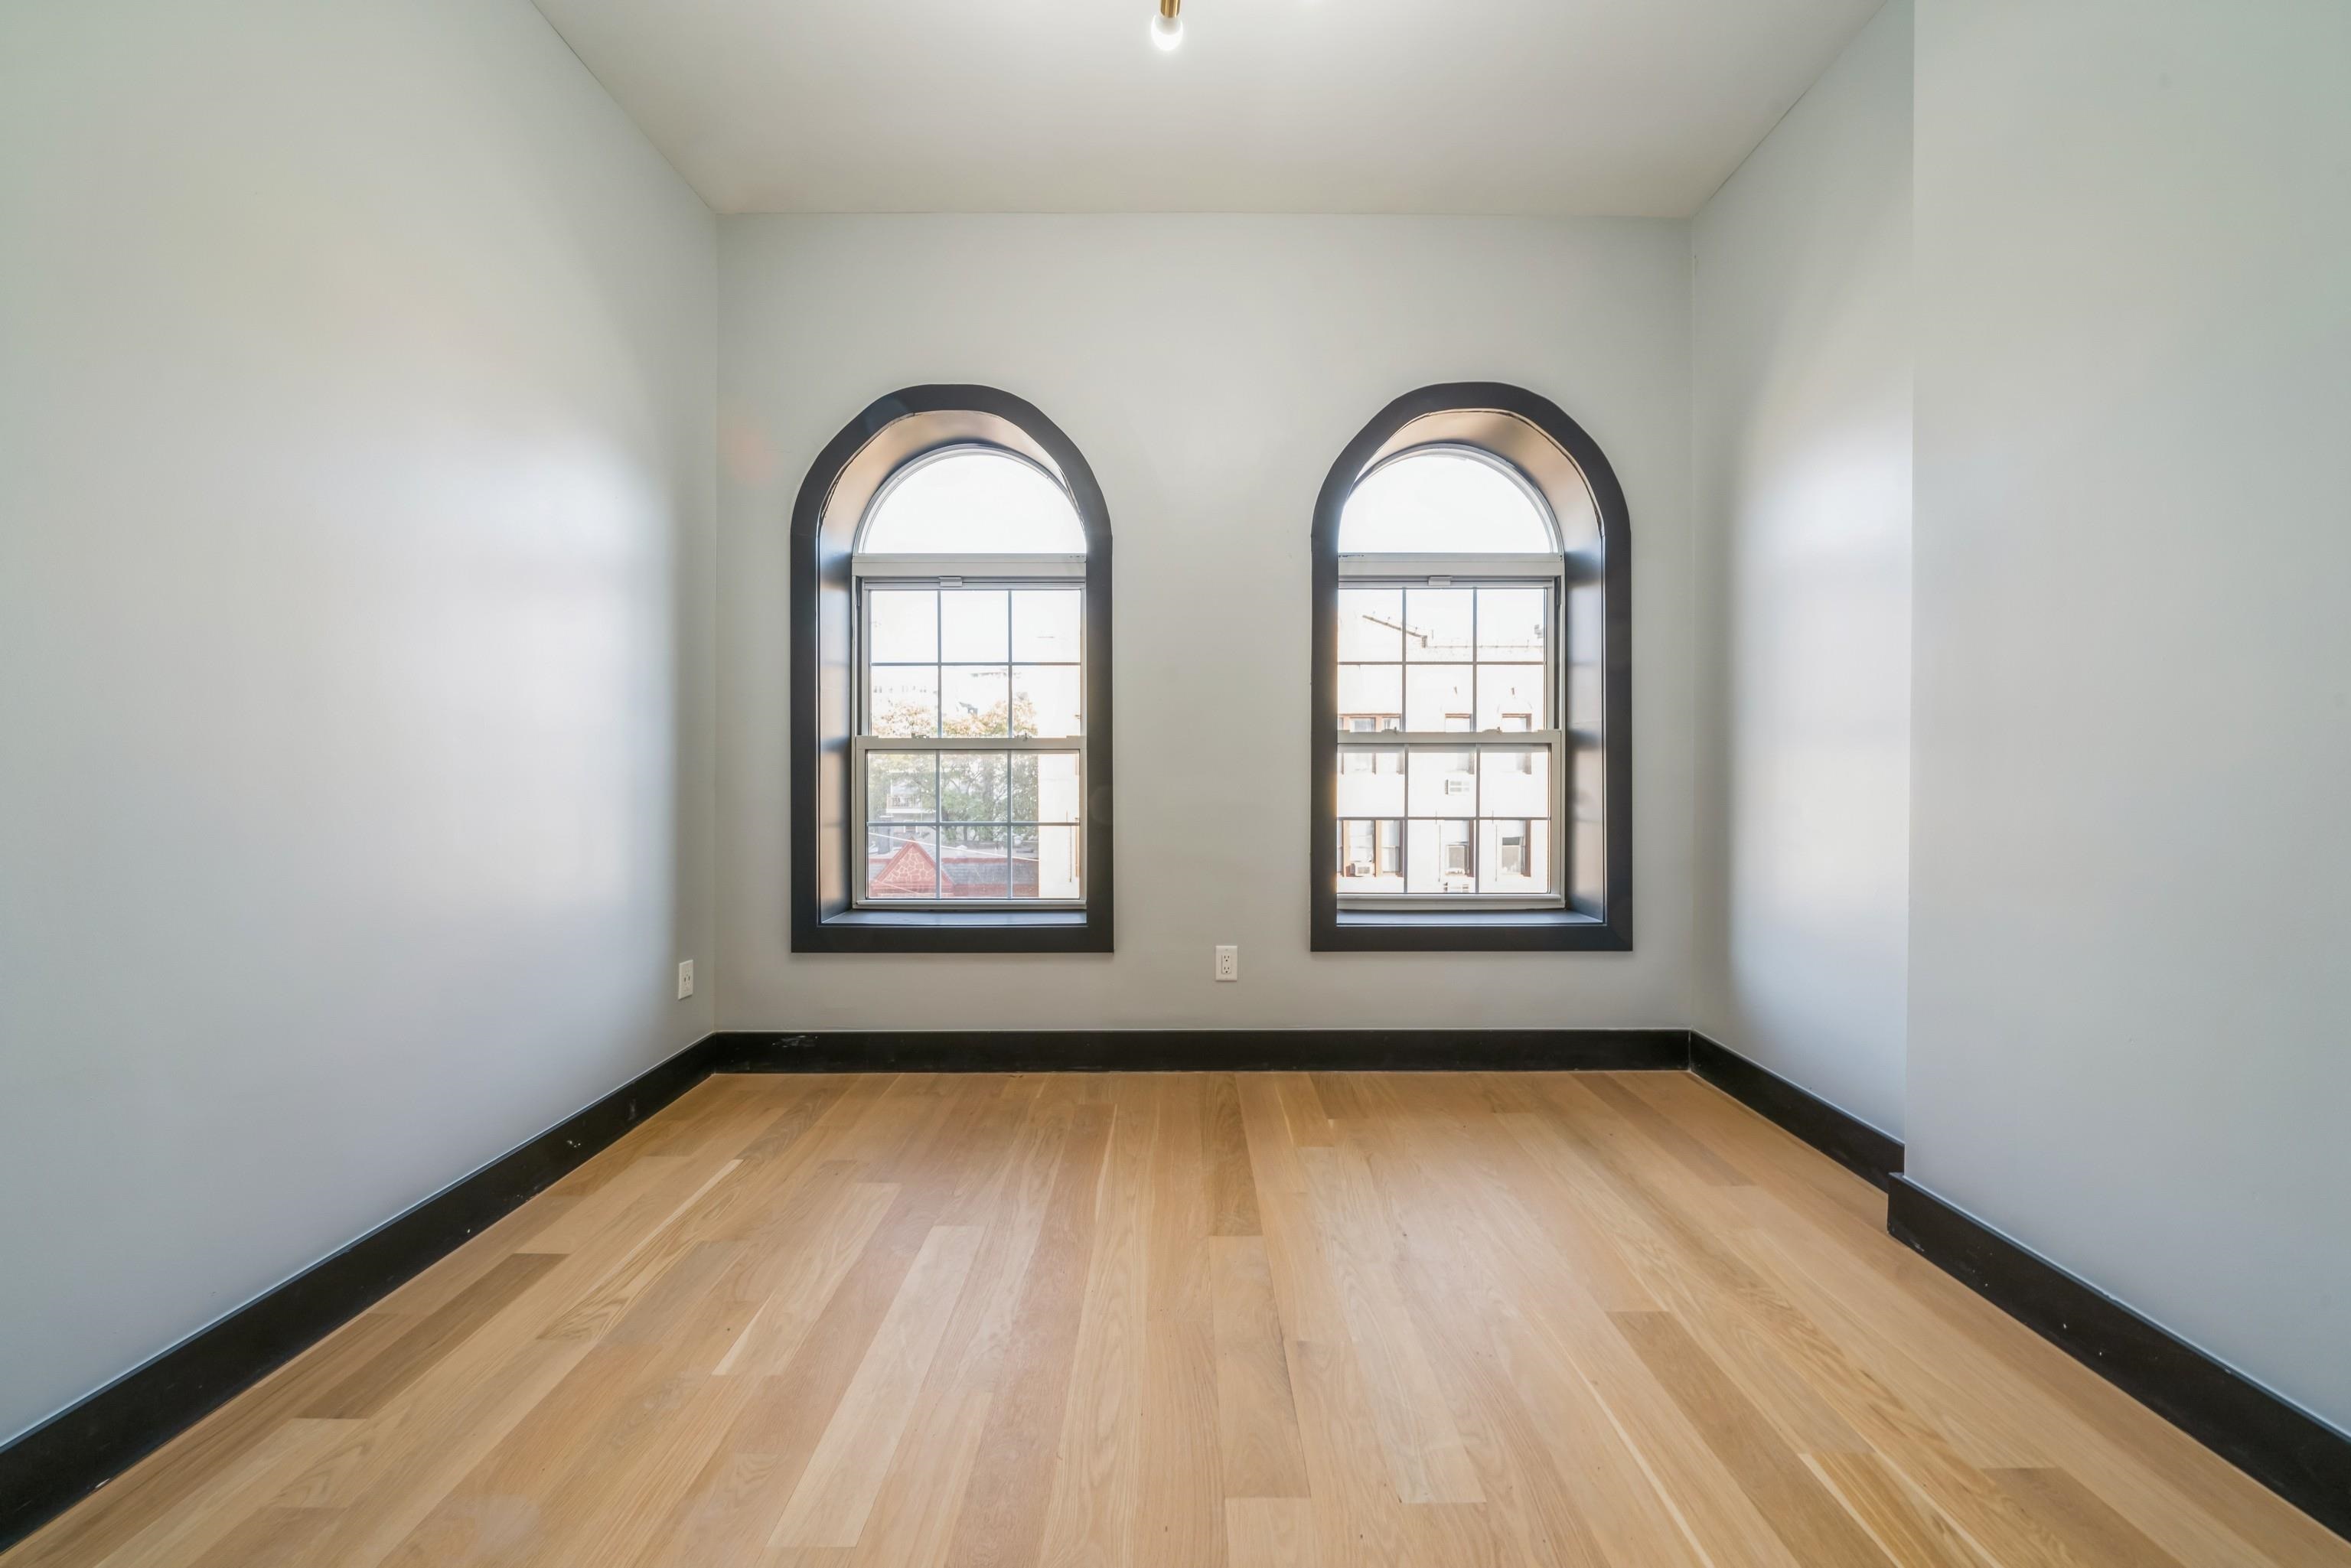 # 240002509 - For Rent in JERSEY CITY - Journal Square NJ